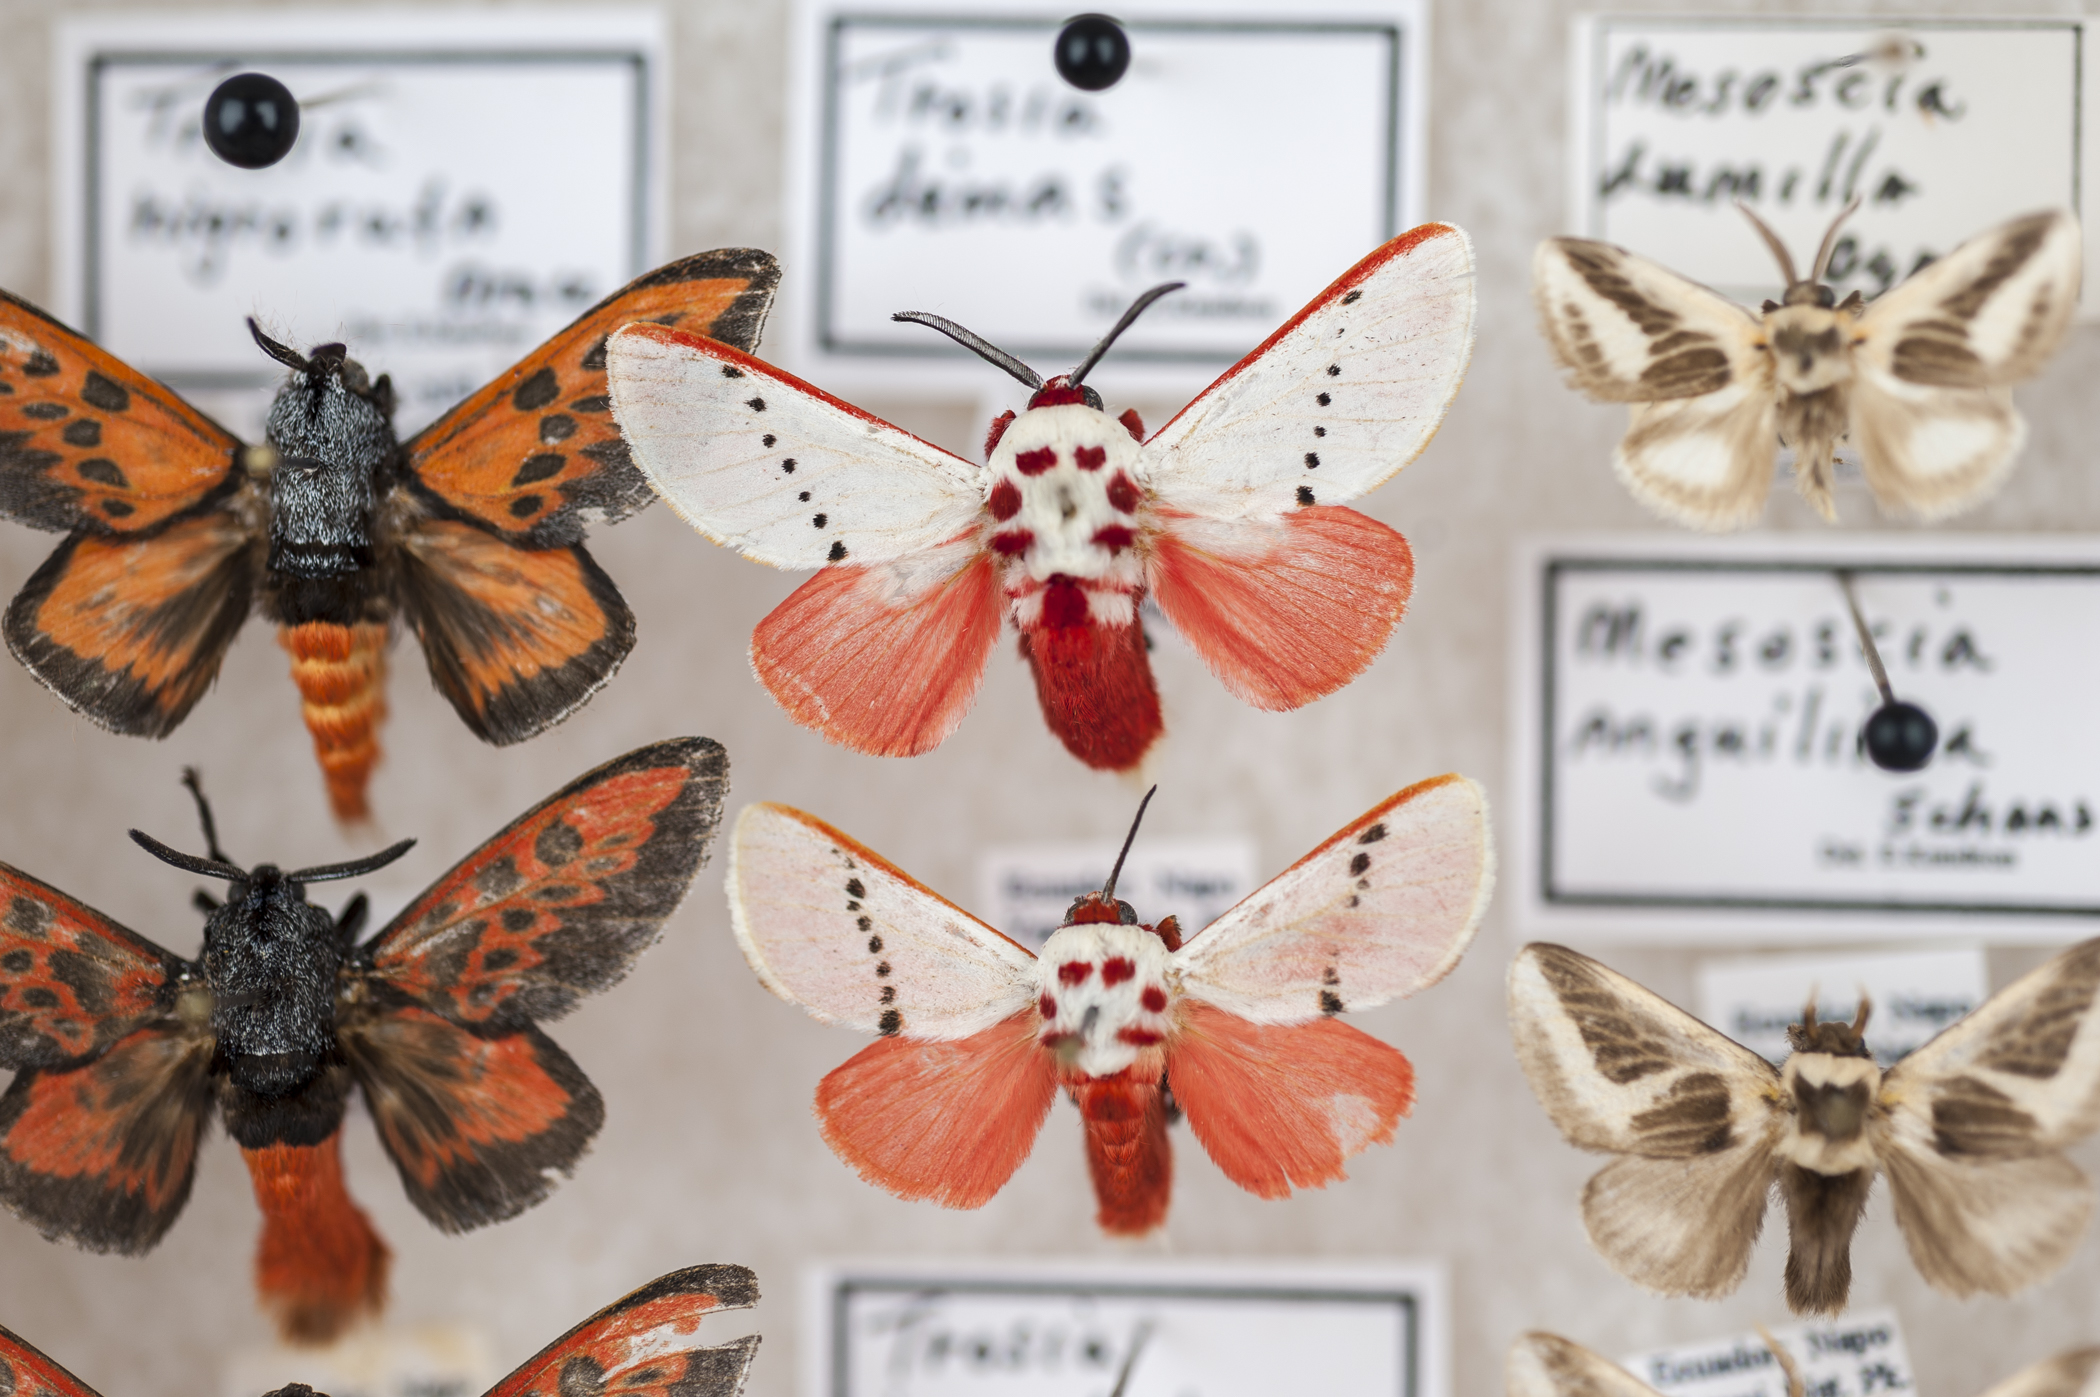 40 years of friendship, 70,000 specimens: Amateur entomologists donate  lifetimes' worth of butterflies and moths – Research News